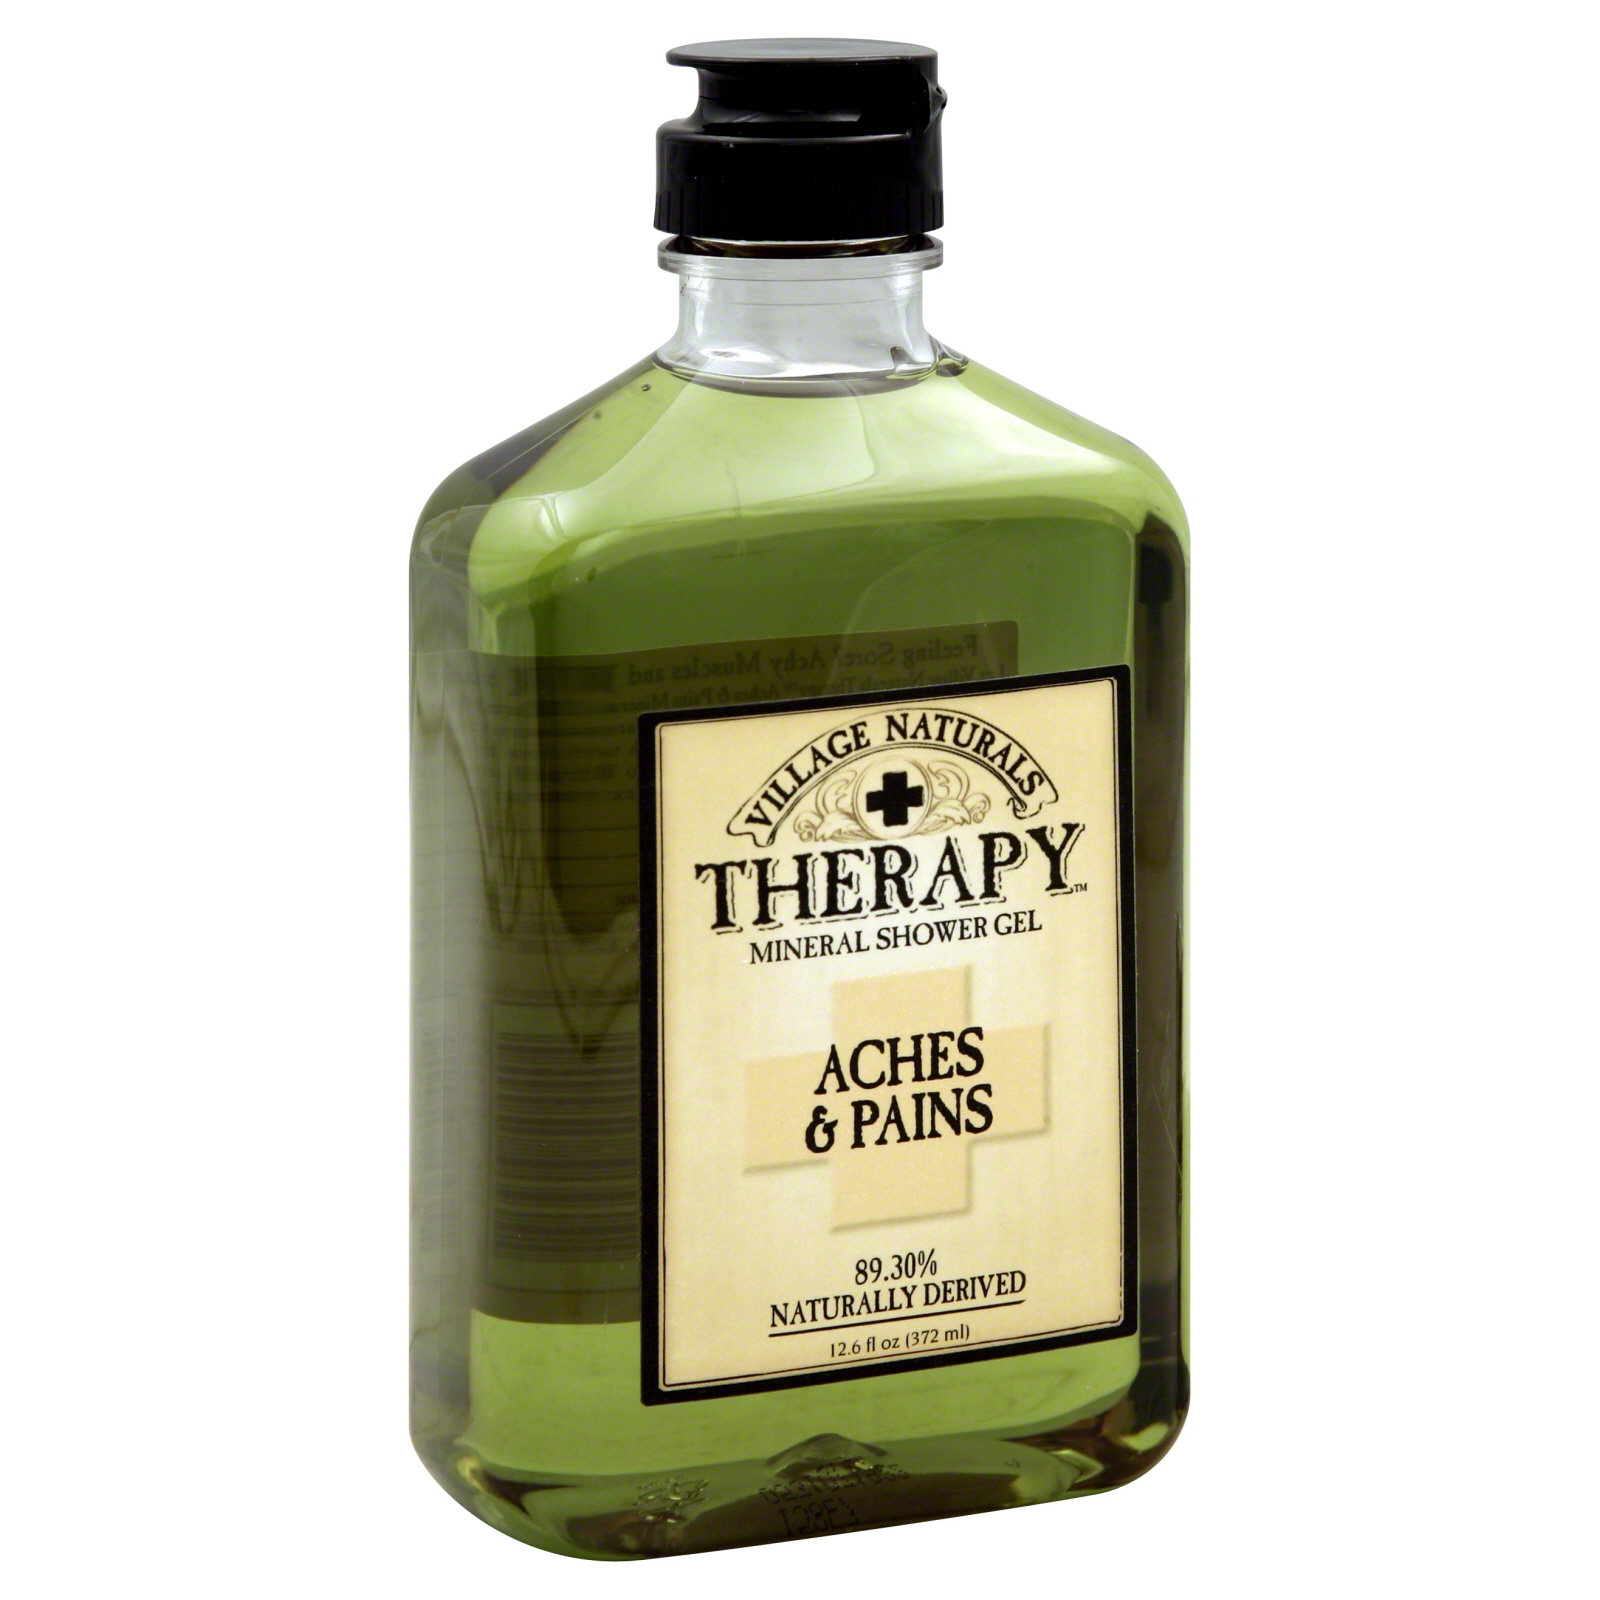 Village Naturals Therapy Mineral Shower Gel, Aches and Pains, 12.6 fl oz (372 ml)